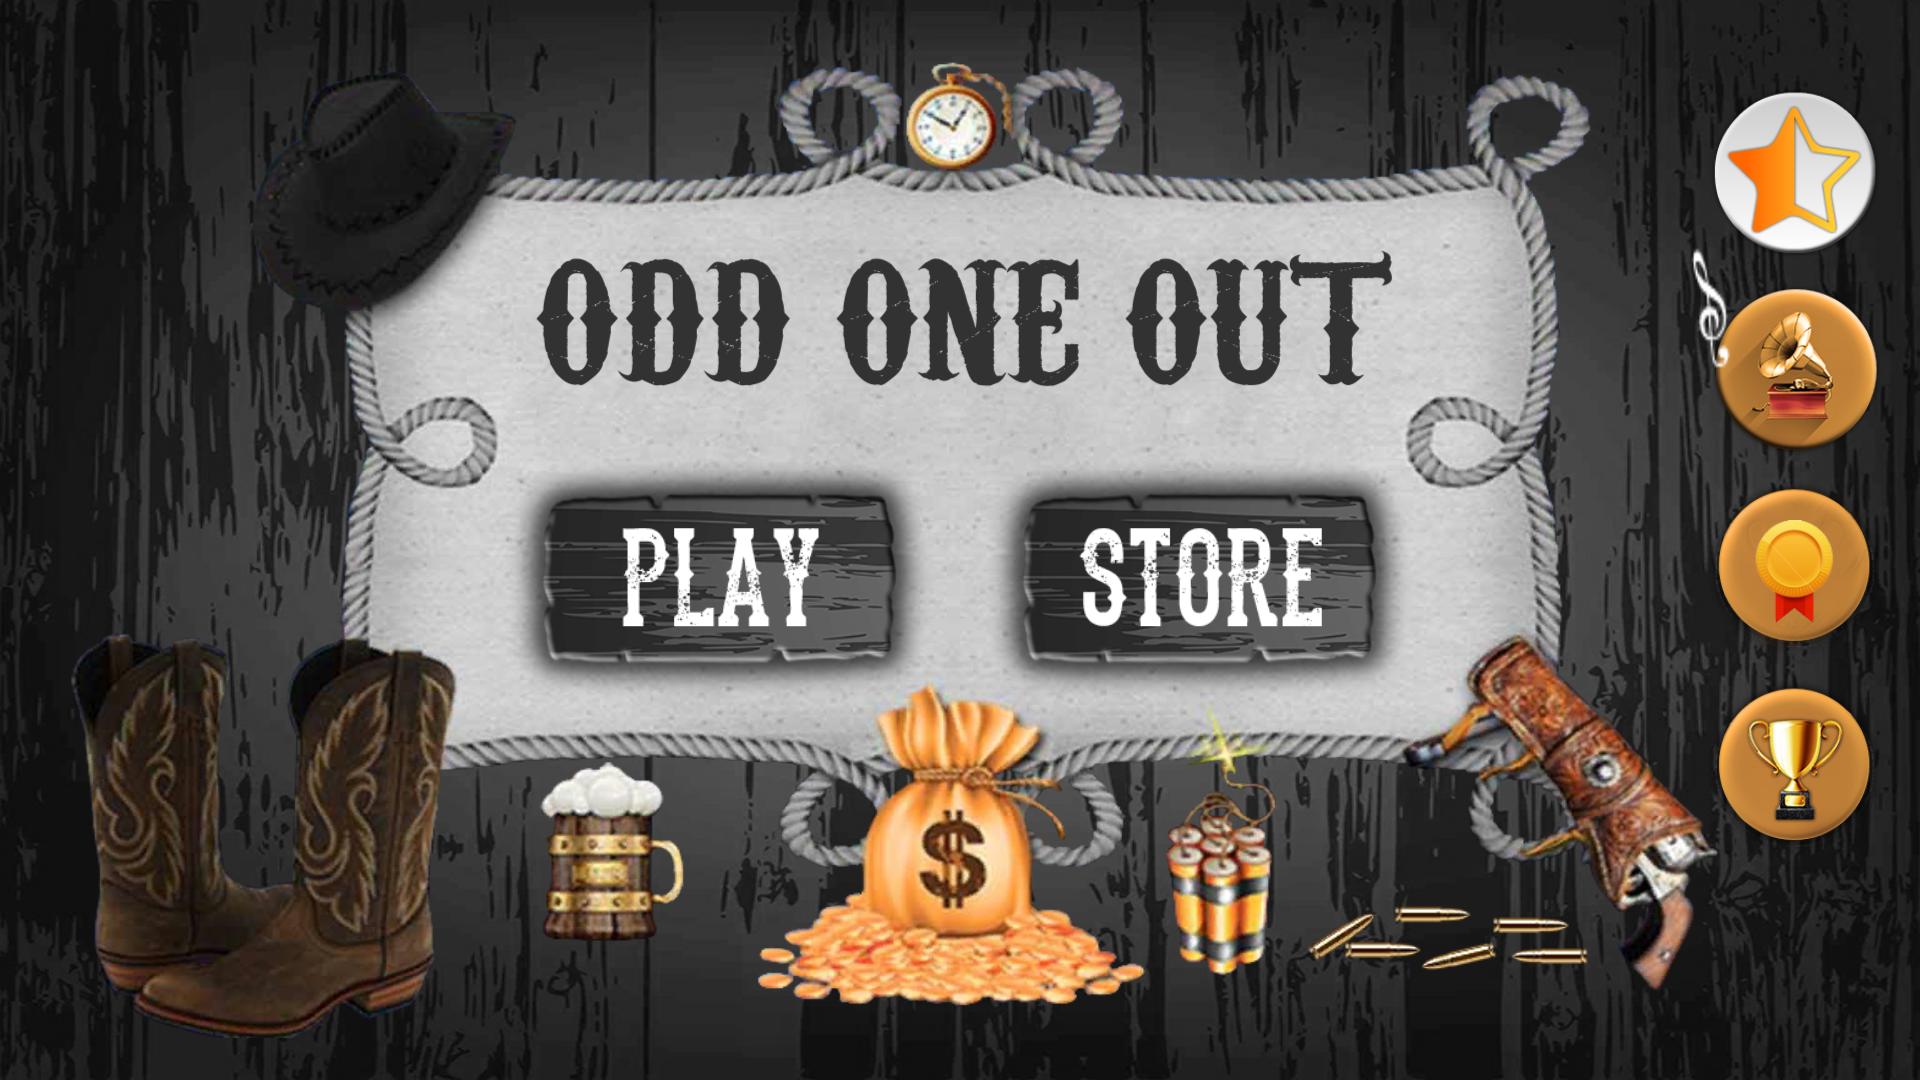 Say out game. Odd one out магазин. Odds on игра. Odd one out game. Стейк аут игра.